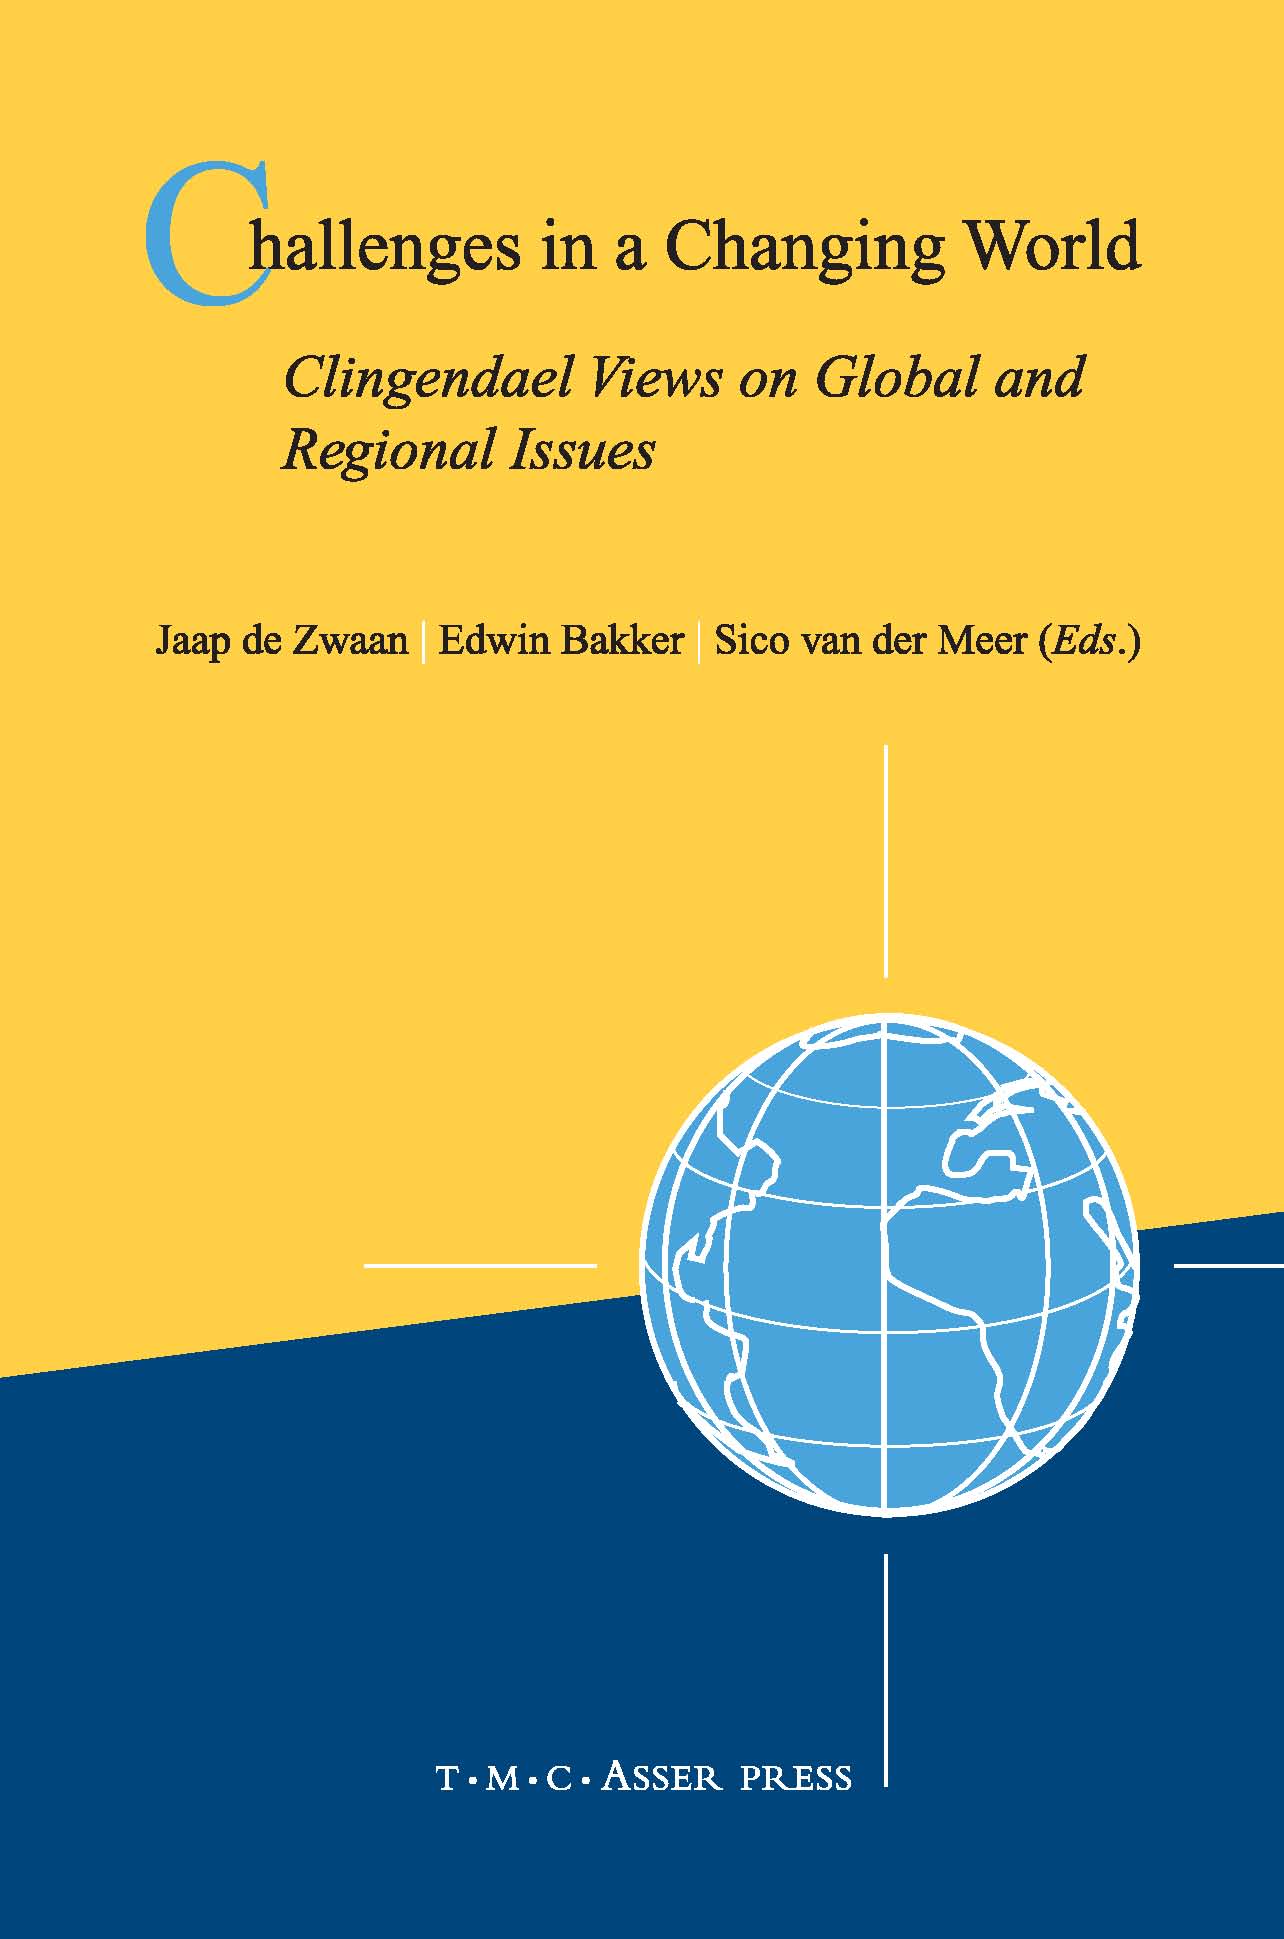 Challenges in a Changing World - Clingendael Views on Global and Regional Issues